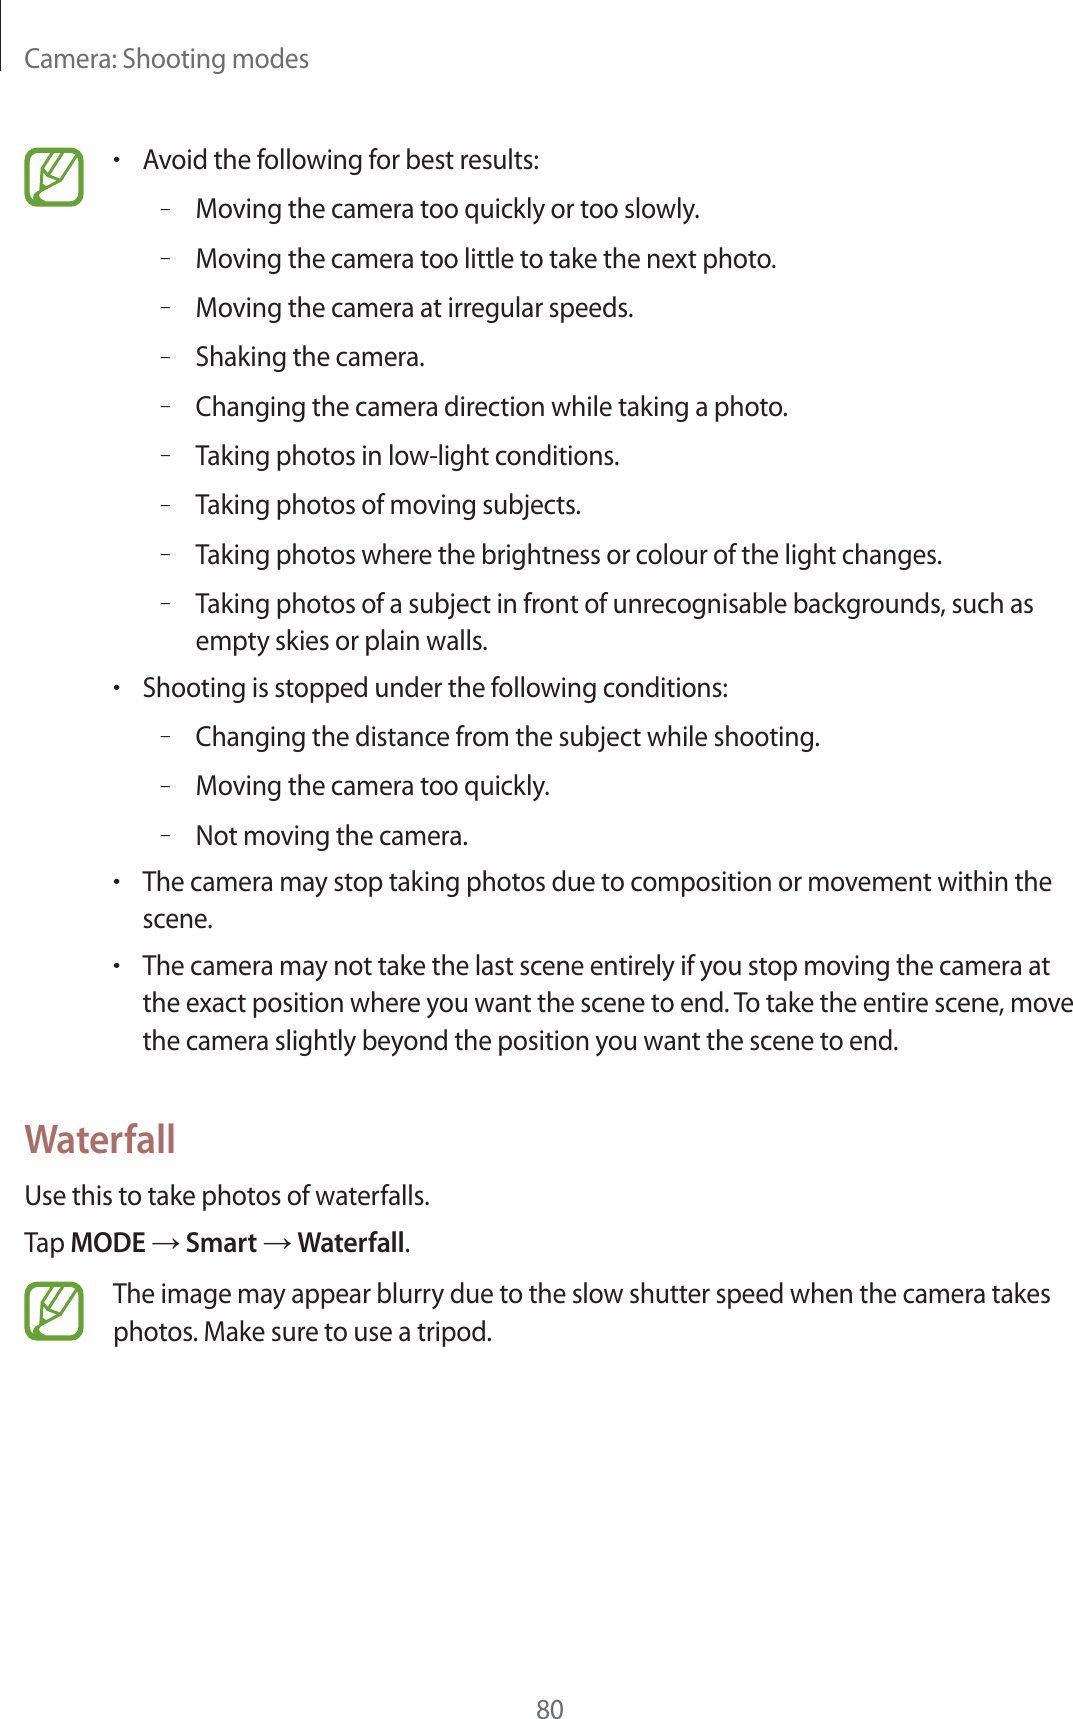 Camera: Shooting modes80rAvoid the following for best results:–Moving the camera too quickly or too slowly.–Moving the camera too little to take the next photo.–Moving the camera at irregular speeds.–Shaking the camera.–Changing the camera direction while taking a photo.–Taking photos in low-light conditions.–Taking photos of moving subjects.–Taking photos where the brightness or colour of the light changes.–Taking photos of a subject in front of unrecognisable backgrounds, such as empty skies or plain walls.rShooting is stopped under the following conditions:–Changing the distance from the subject while shooting.–Moving the camera too quickly.–Not moving the camera.rThe camera may stop taking photos due to composition or movement within the scene.rThe camera may not take the last scene entirely if you stop moving the camera at the exact position where you want the scene to end. To take the entire scene, move the camera slightly beyond the position you want the scene to end.WaterfallUse this to take photos of waterfalls.Tap MODE ĺ Smart ĺ Waterfall.The image may appear blurry due to the slow shutter speed when the camera takes photos. Make sure to use a tripod.